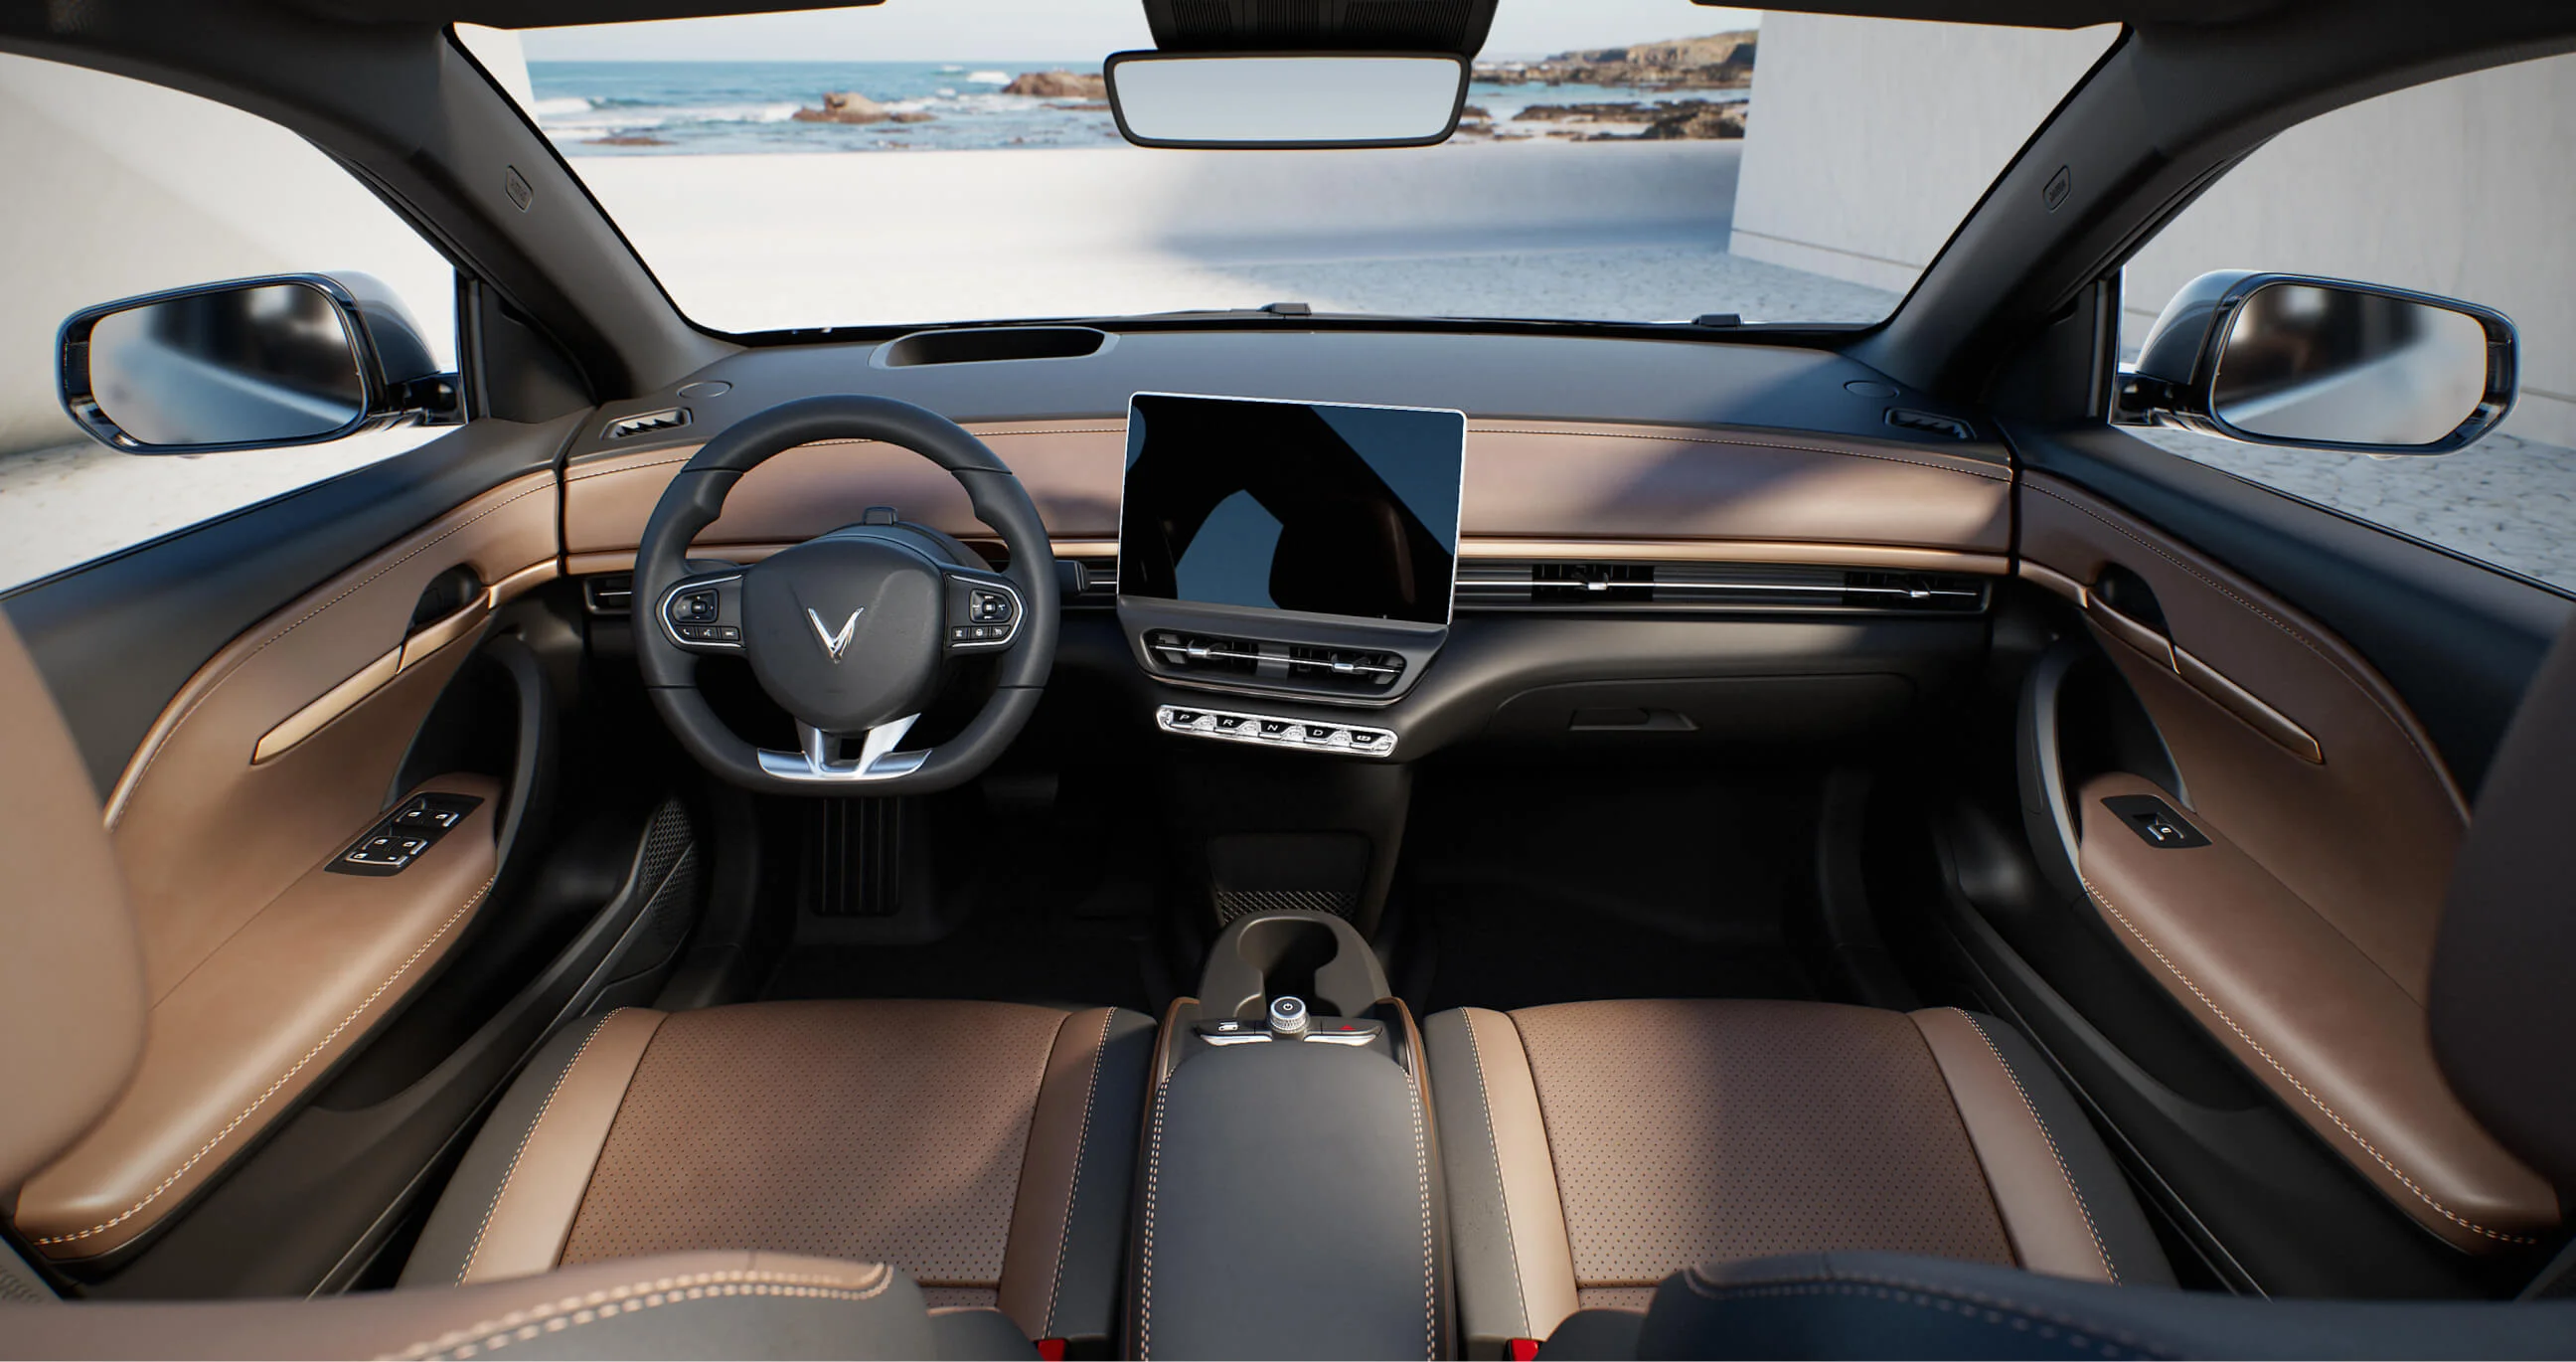 The VinFast VF 6 features a 12.9” infotainment display with a head-up display, a heated steering wheel, and a vegan leather interior